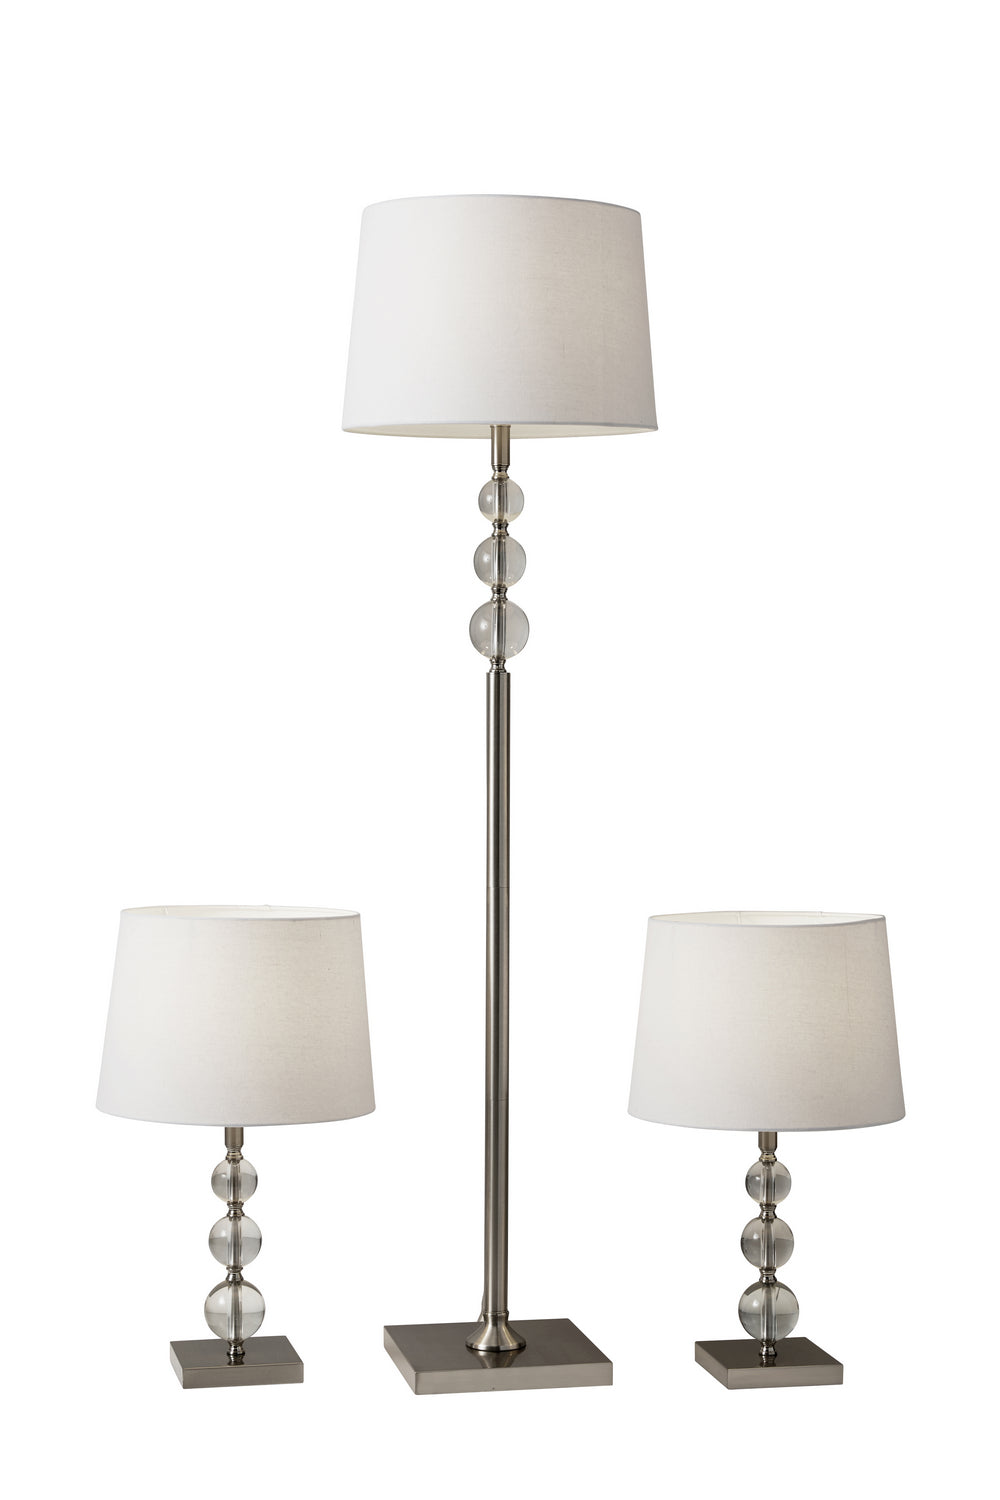 Adesso Home 1585-22  Olivia Lamp Brushed Steel